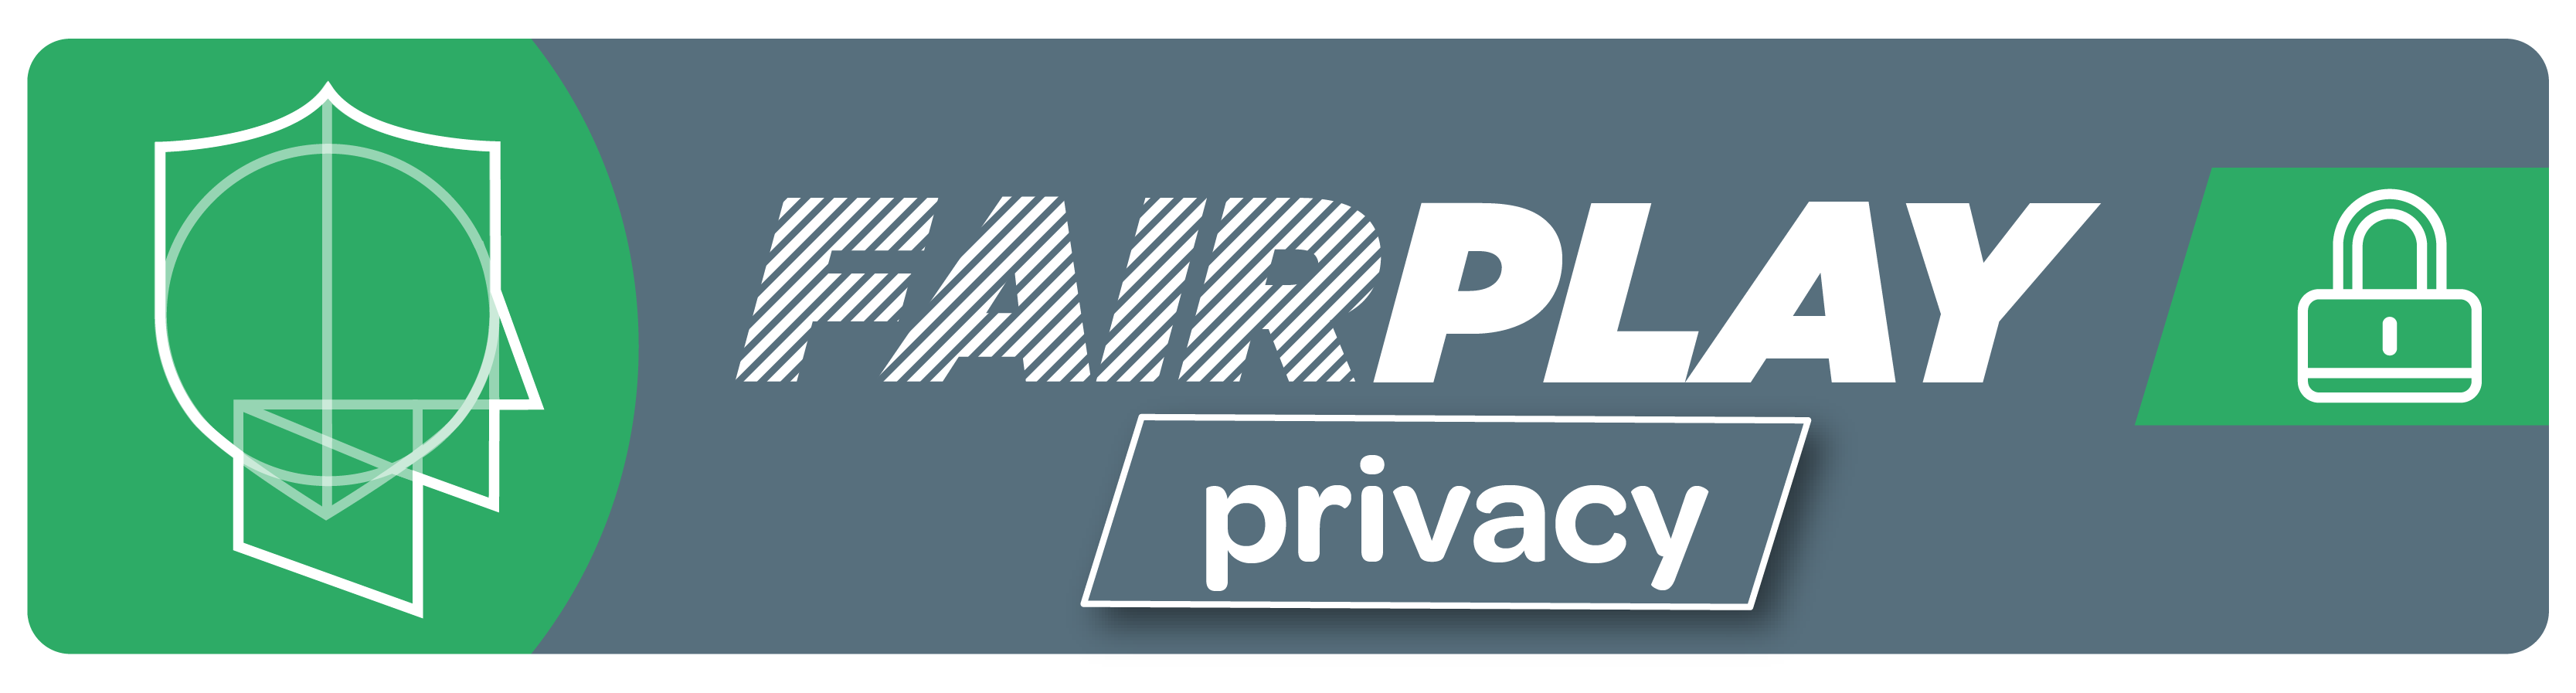 Fairplay privacy